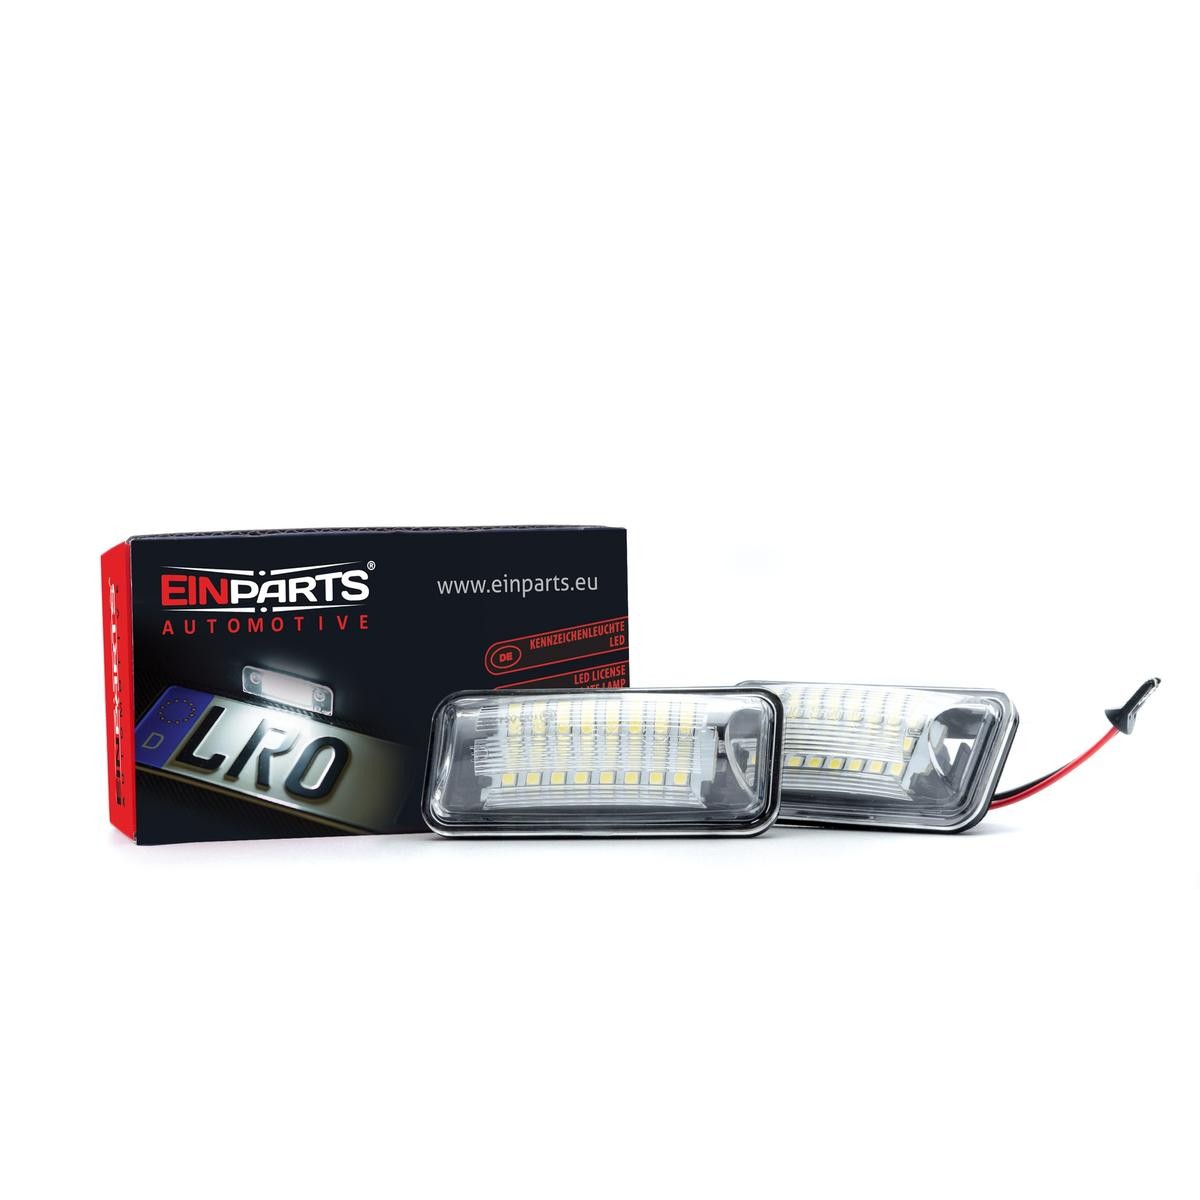 EP40 EINPARTS Number plate light TOYOTA LED